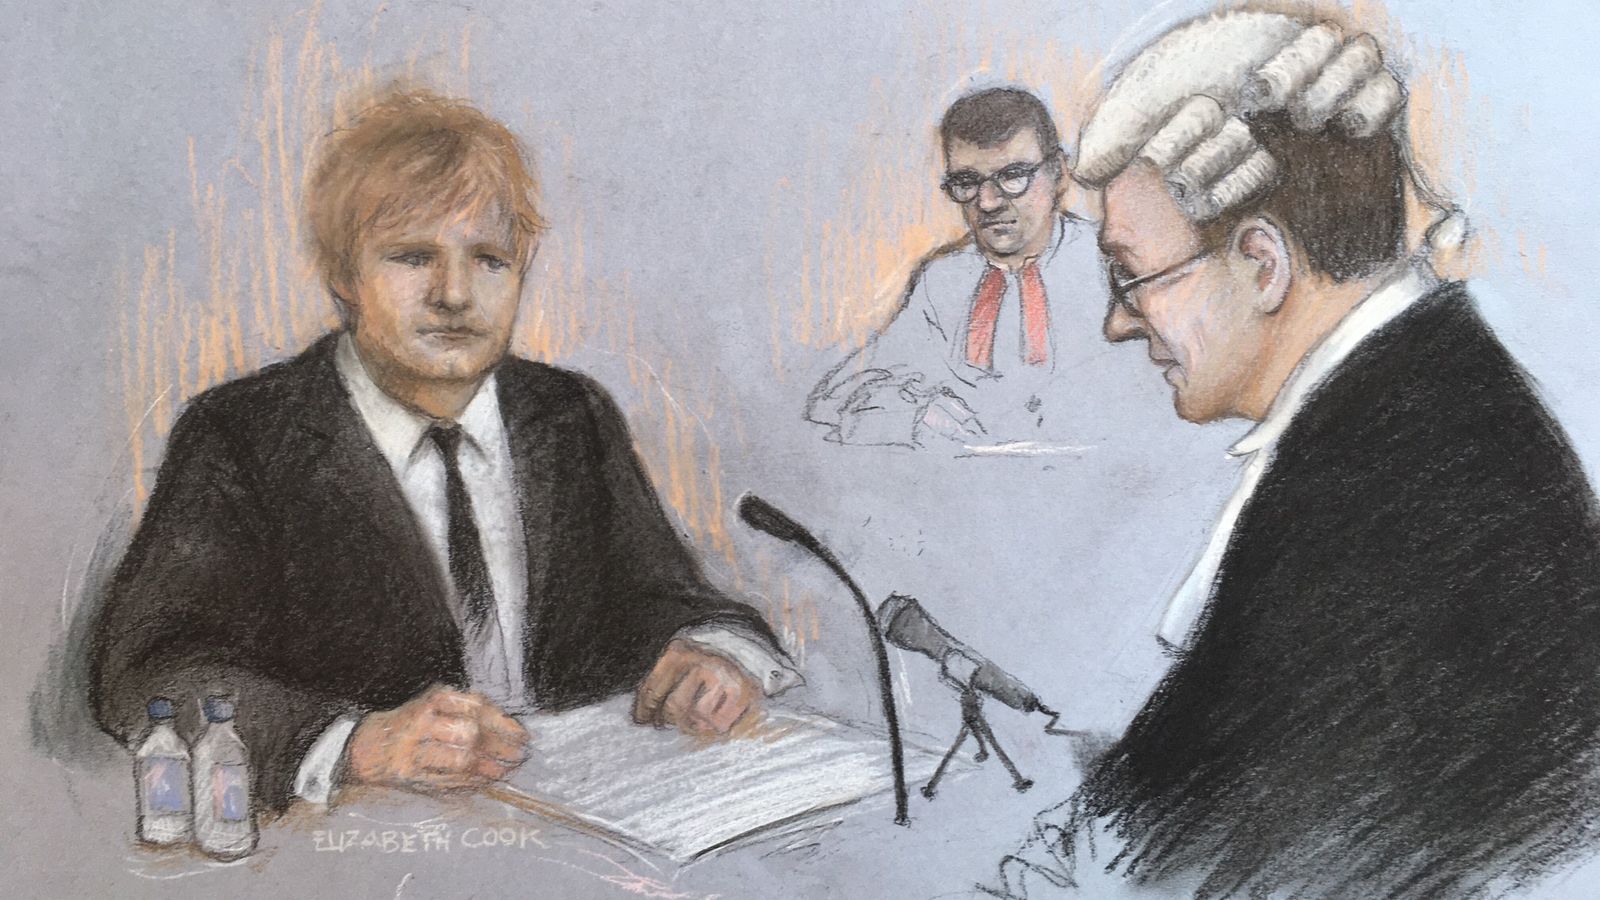 Sheeran gave evidence for two days at the High Court. Pic: Elizabeth Cook/PA